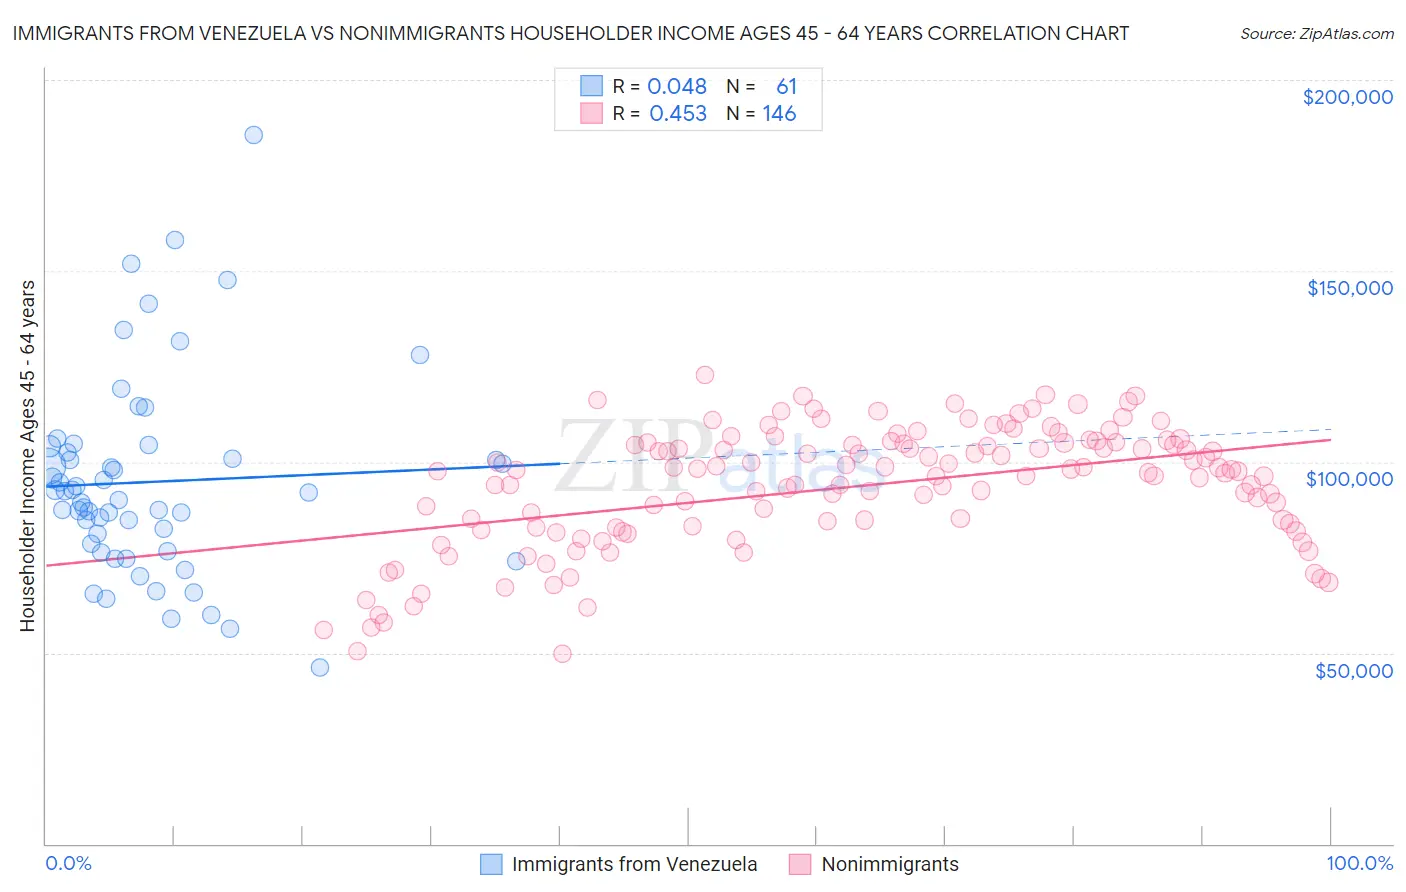 Immigrants from Venezuela vs Nonimmigrants Householder Income Ages 45 - 64 years